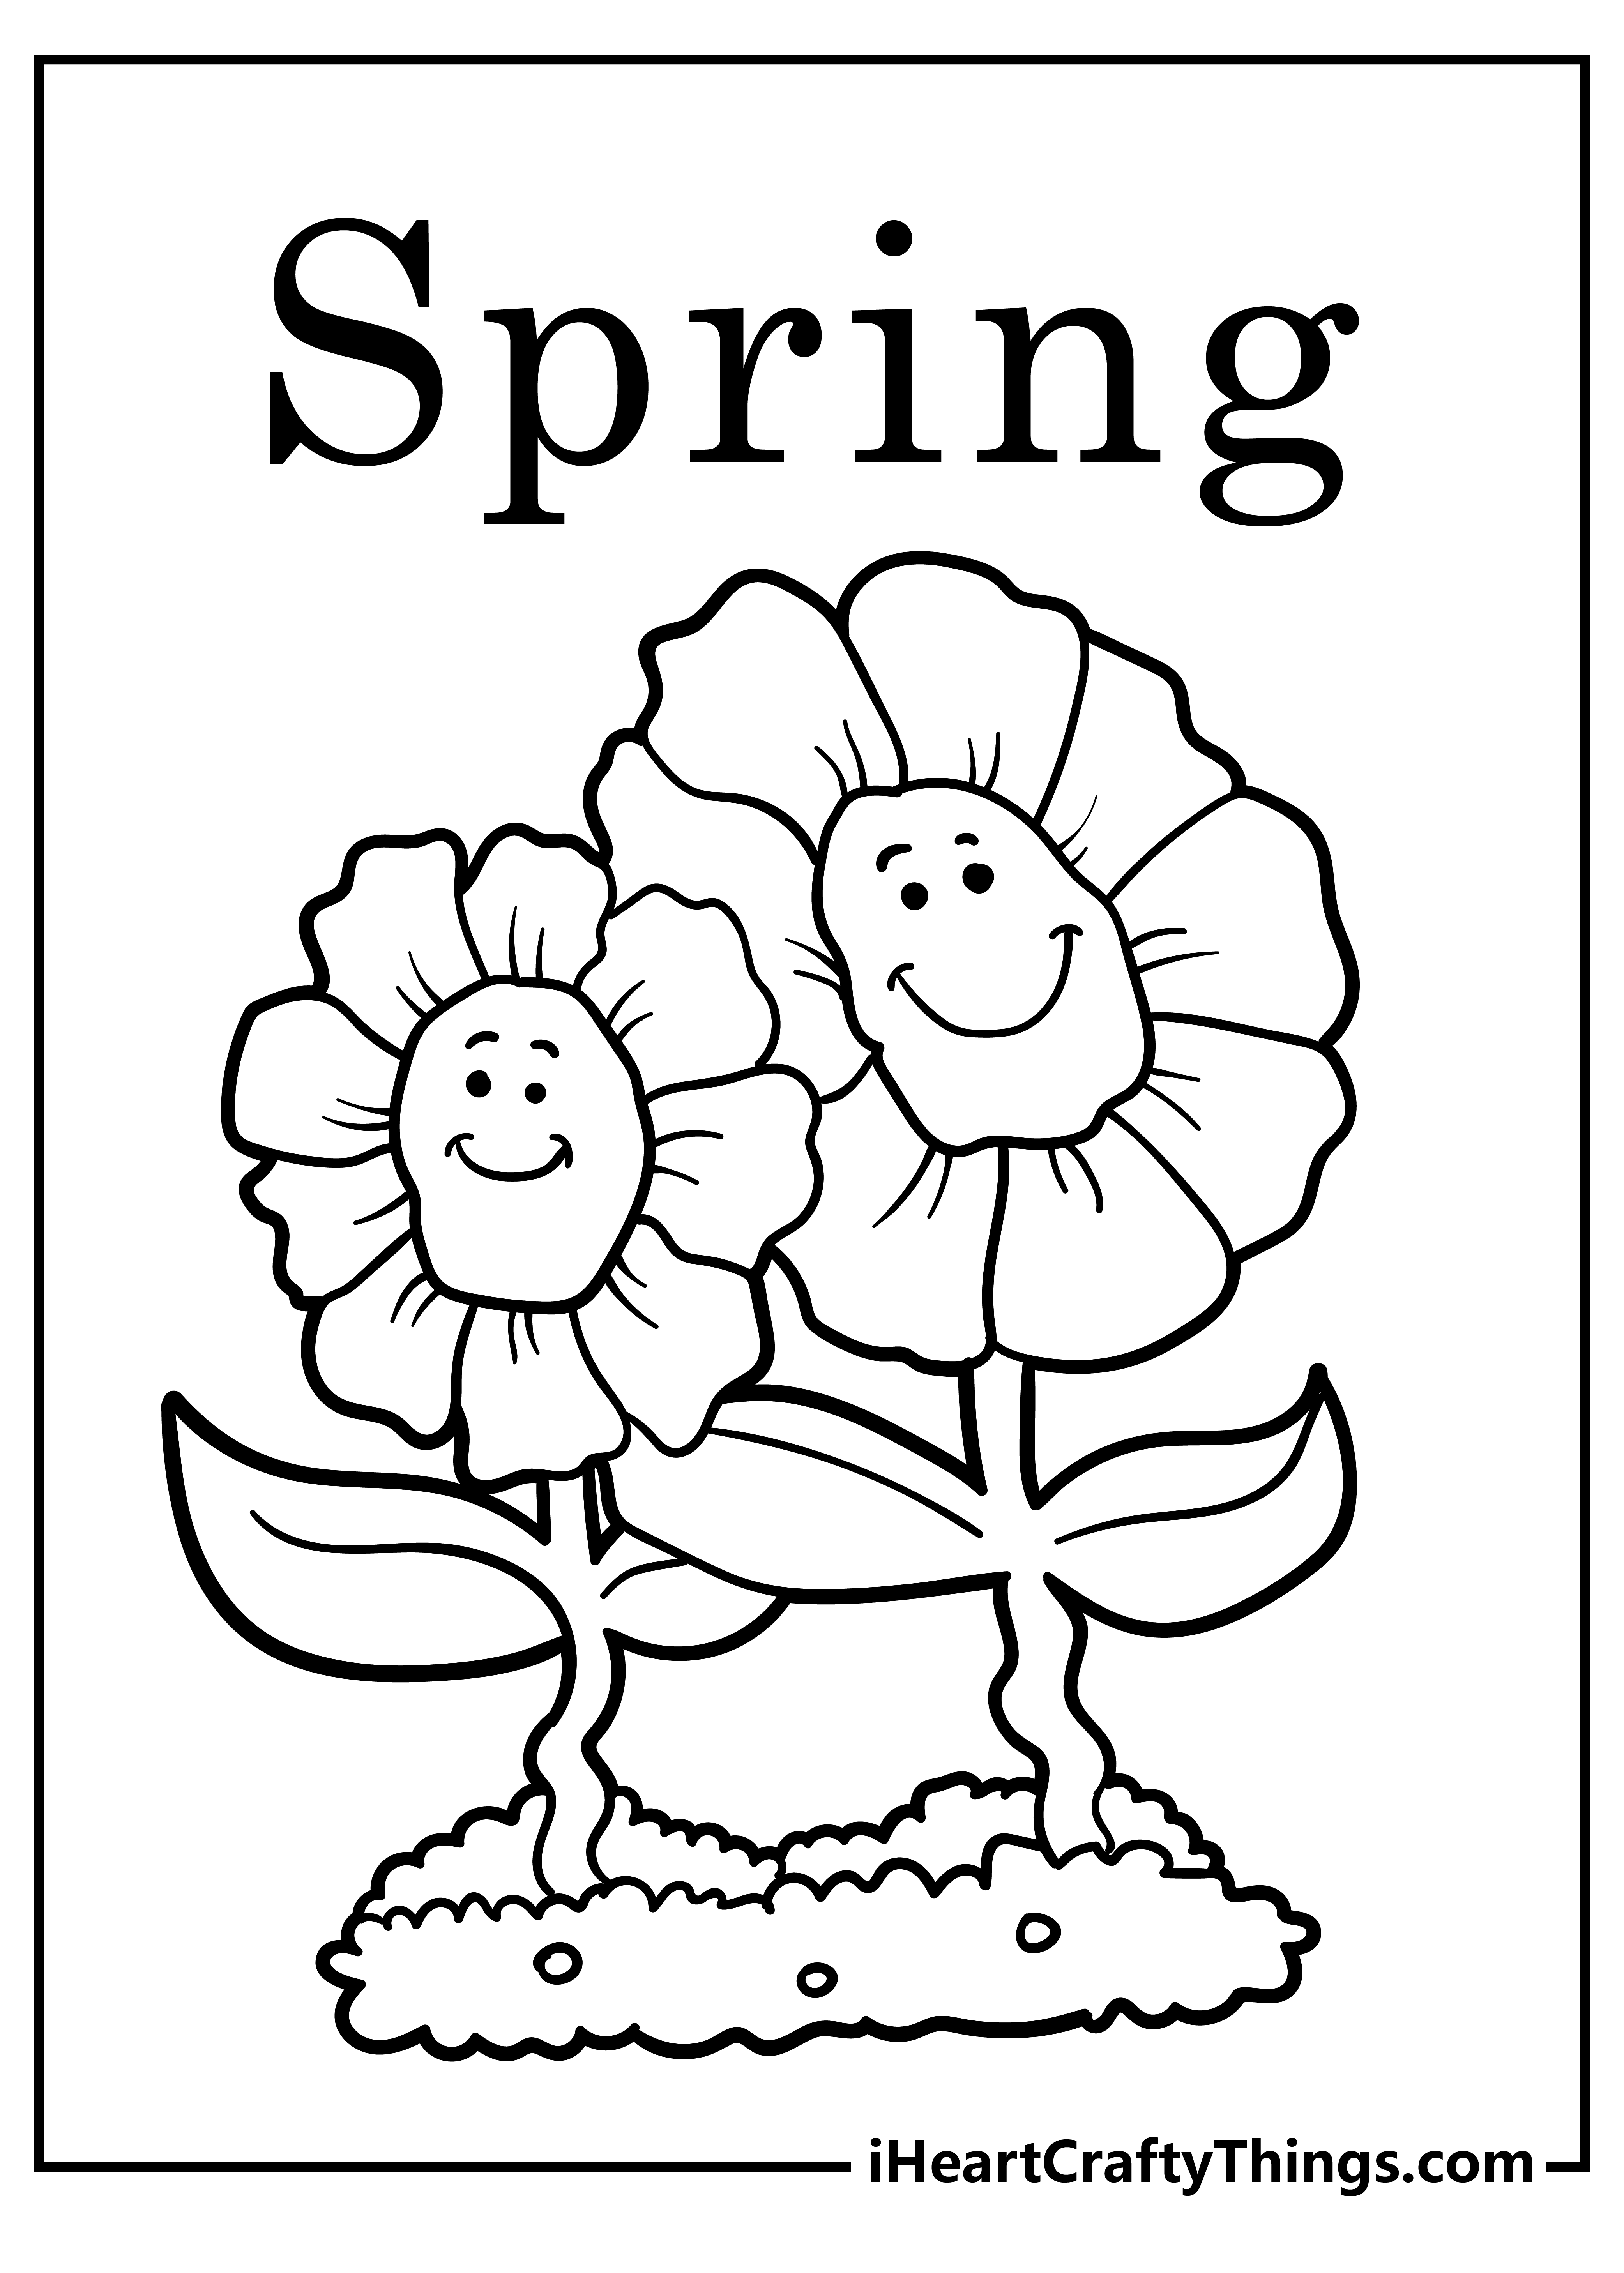 Spring Coloring Book for adults free download